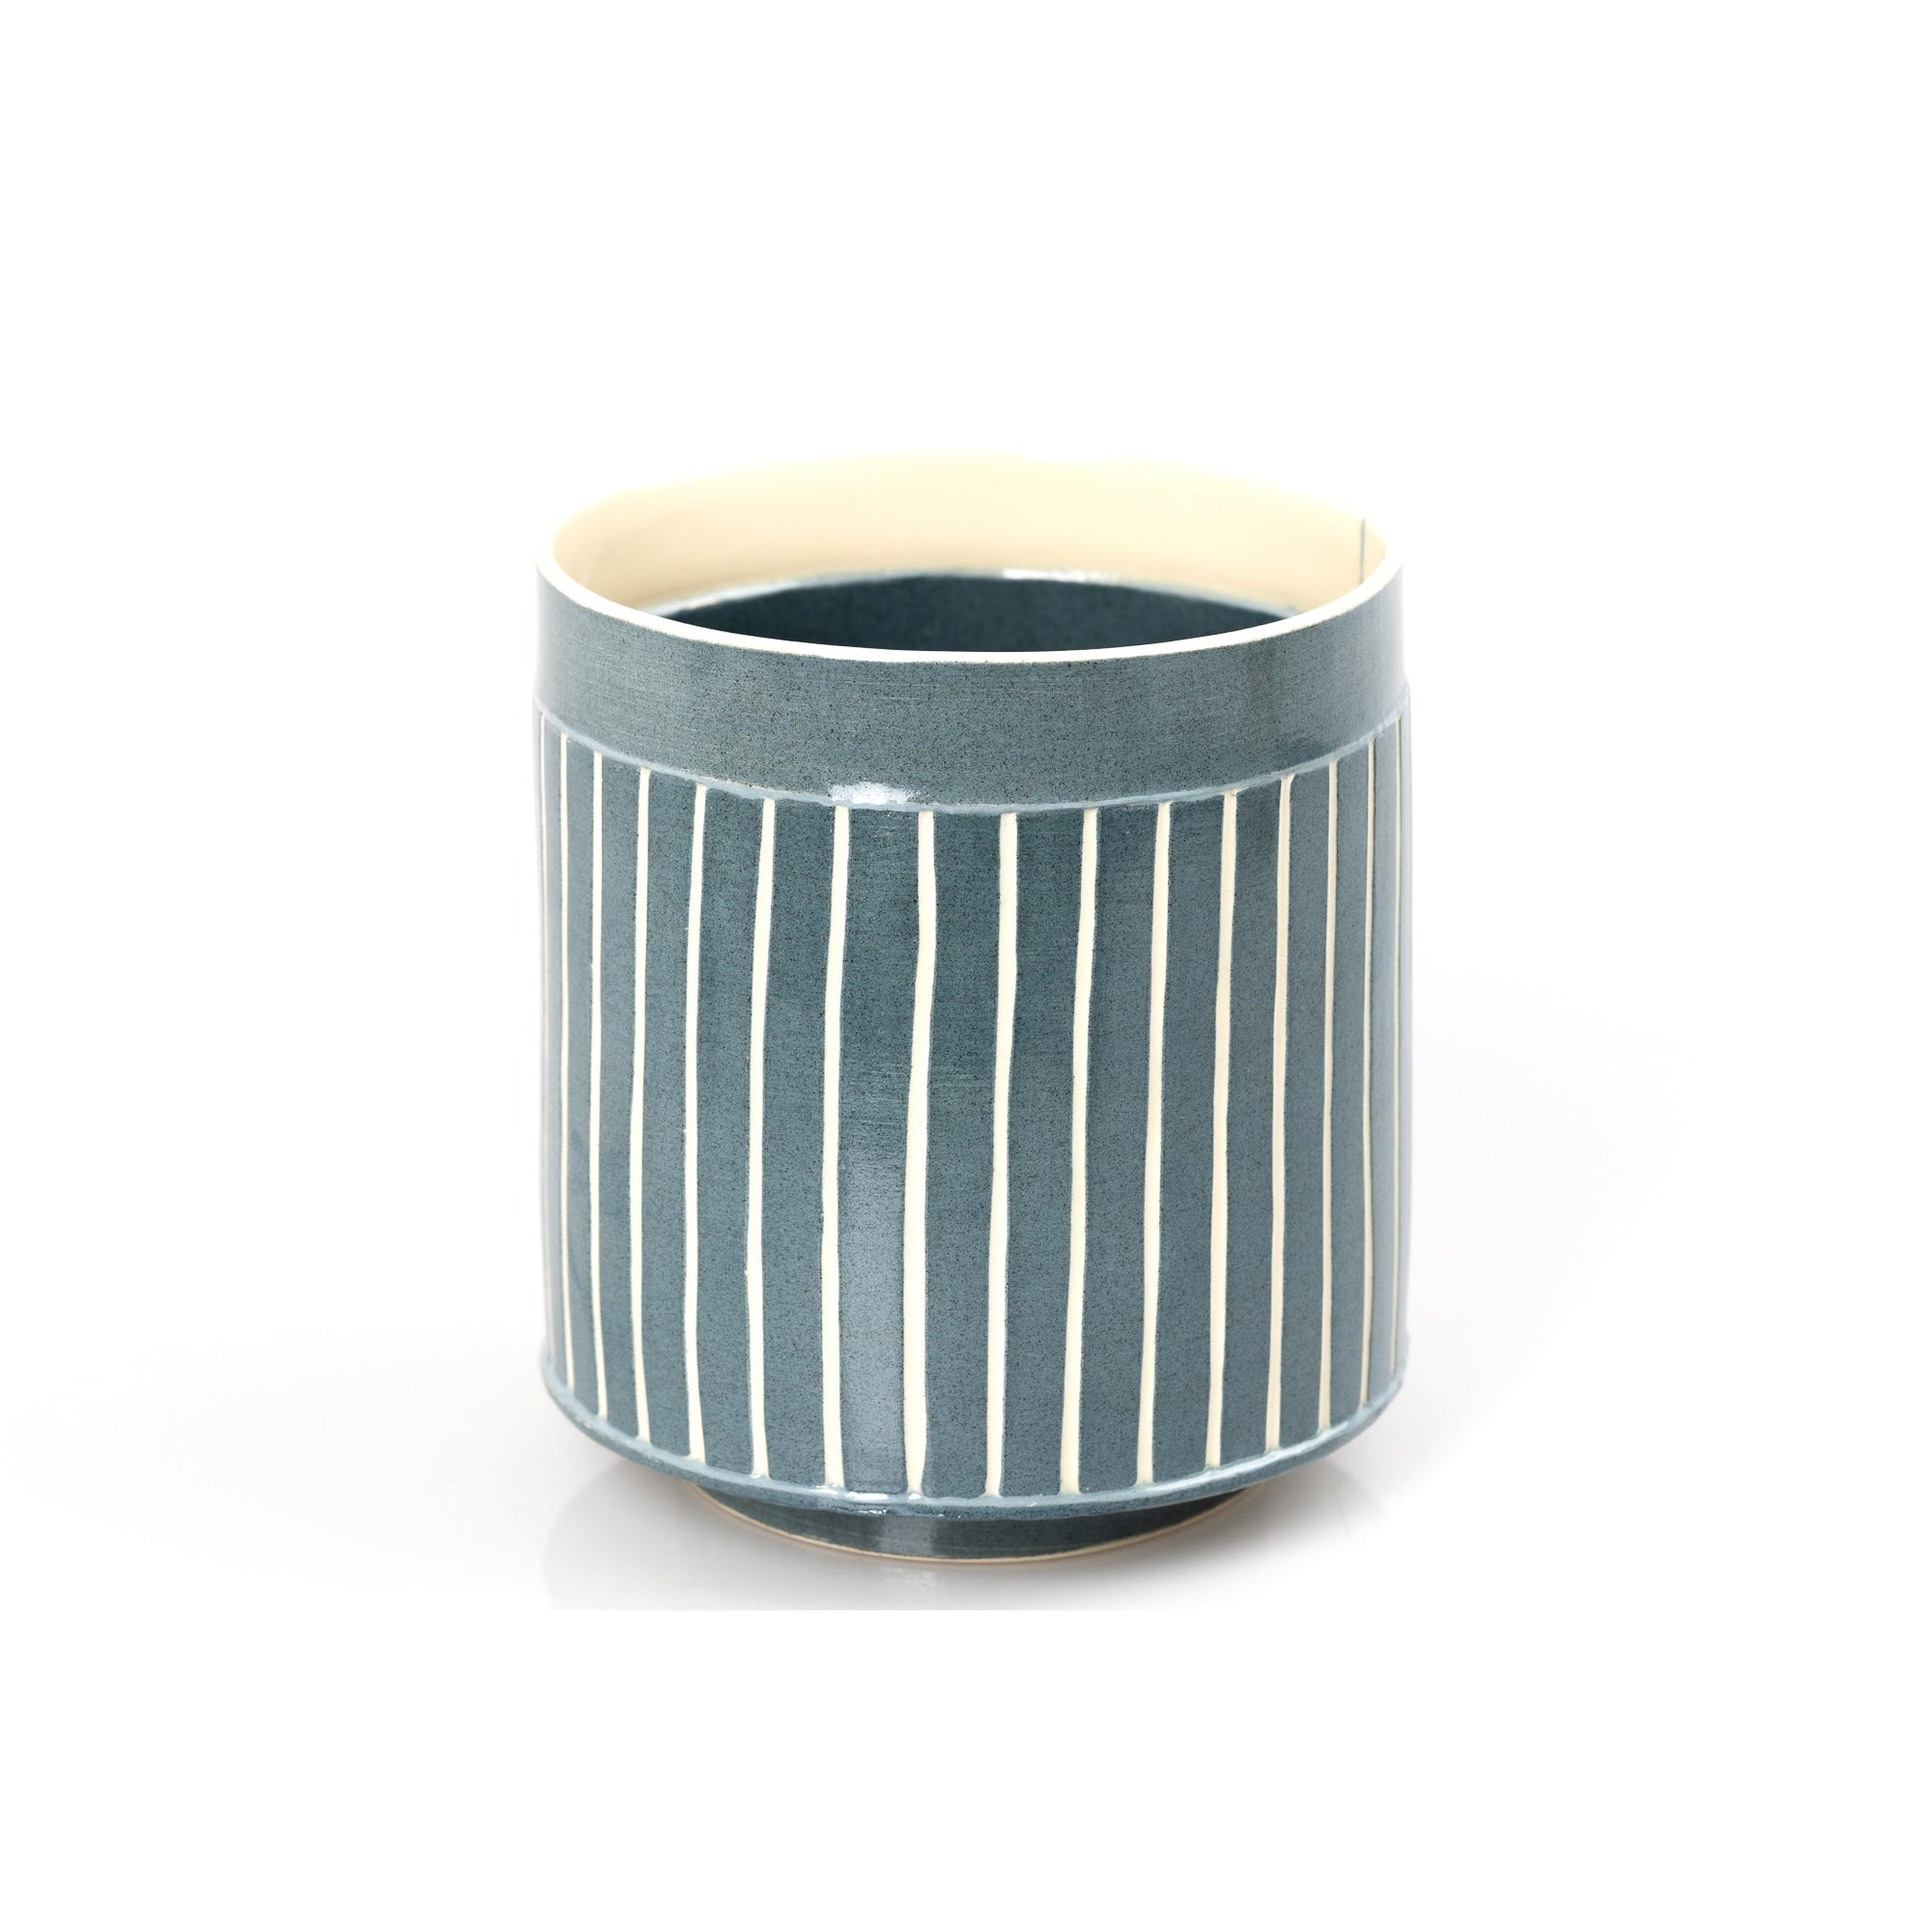 MR16 Mid Round Vessel, handbuilt ceramic created by Emily-Kriste Wilcox, available from Padstow Gallery, Cornwall